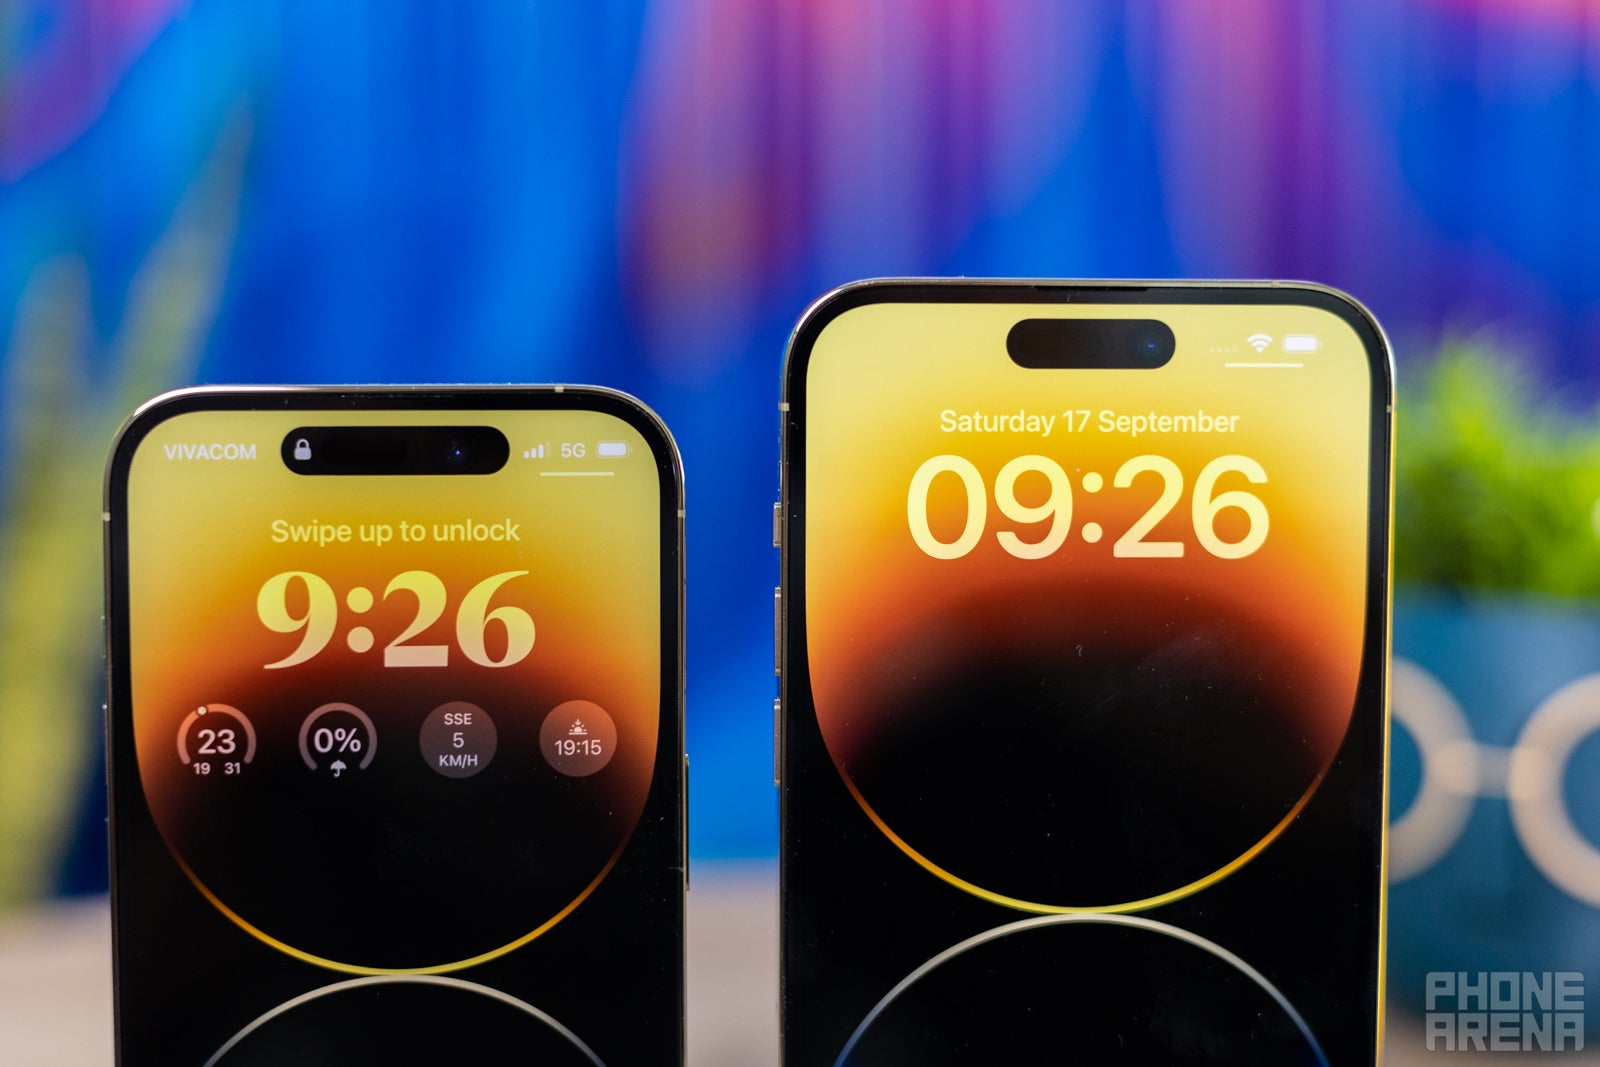 Years after Android, the iPhone finally gets an always-on display functionality with its own set of quirks (Image Credit - PhoneArena) - Apple iPhone 14 Pro Max vs iPhone 14 Pro: The itch to switch